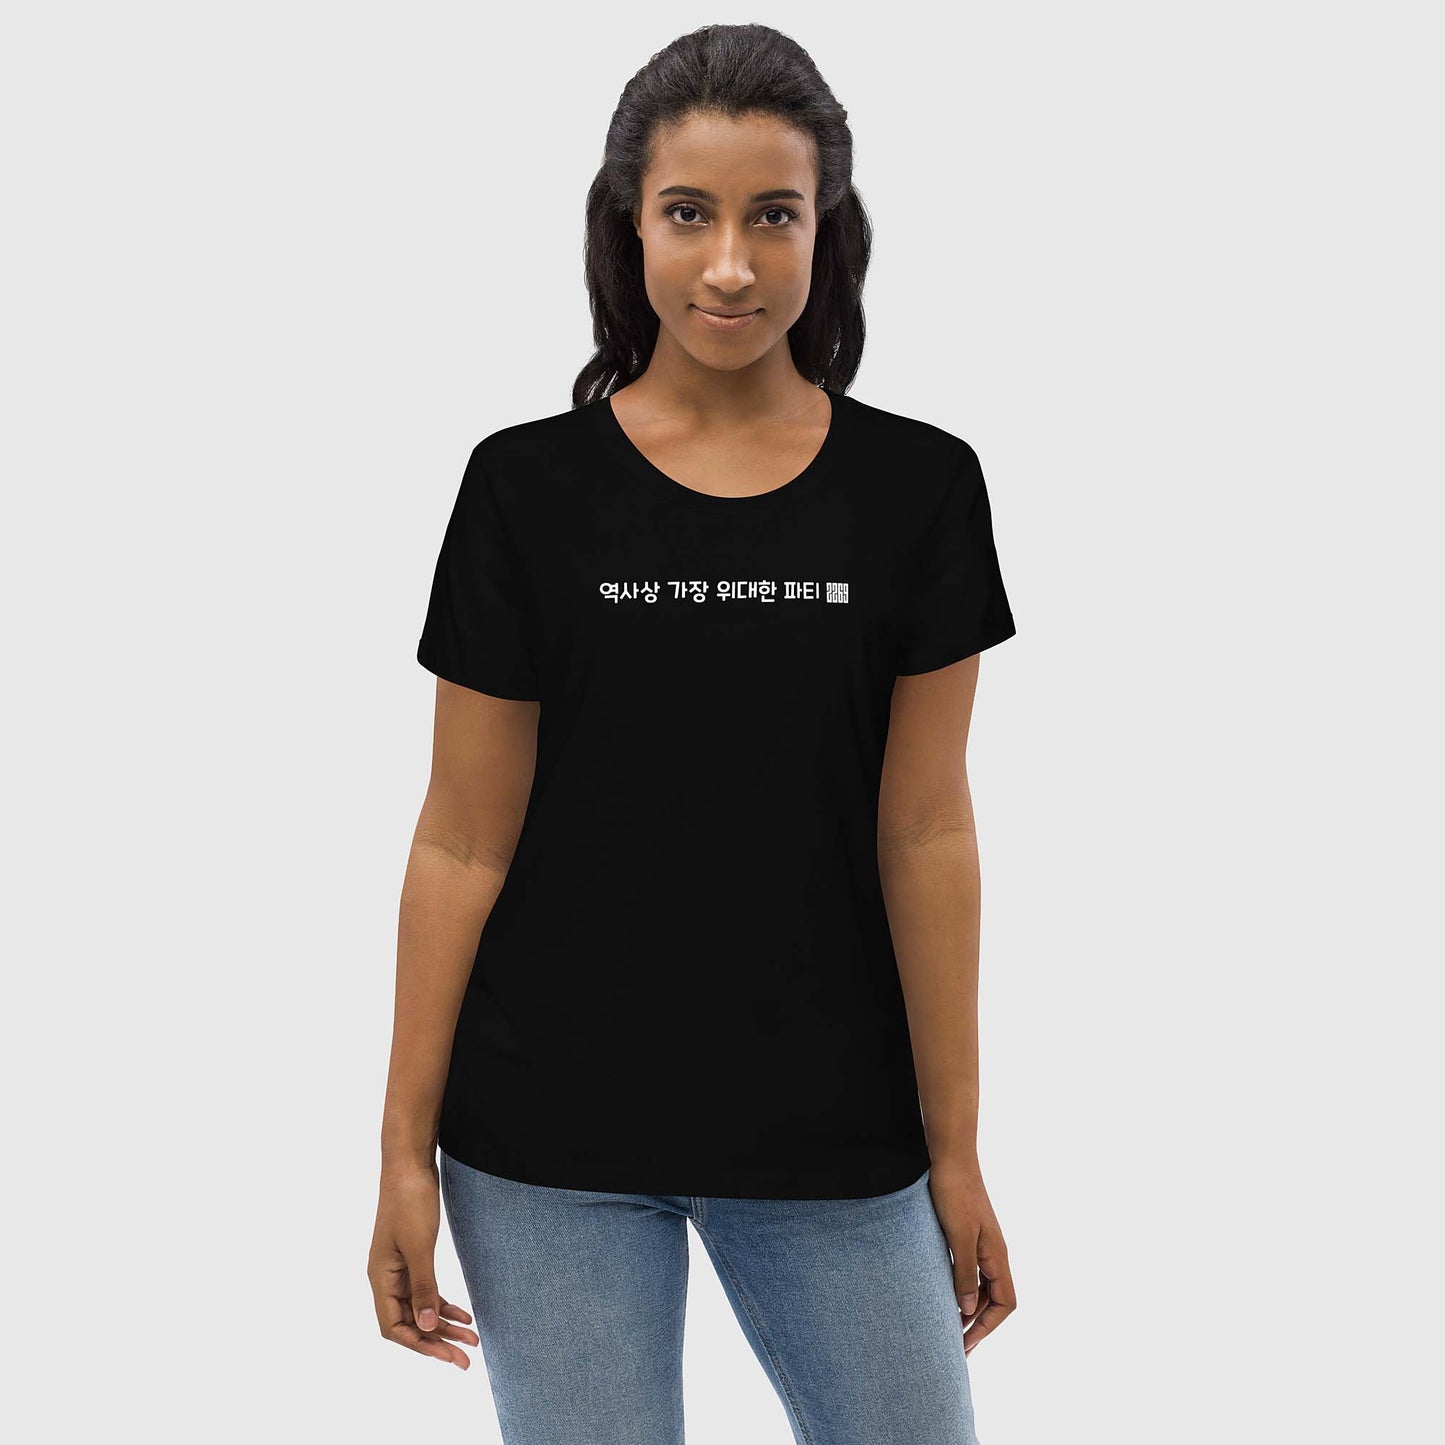 Women's black fitted organic cotton t-shirt with Korean 2269 party message